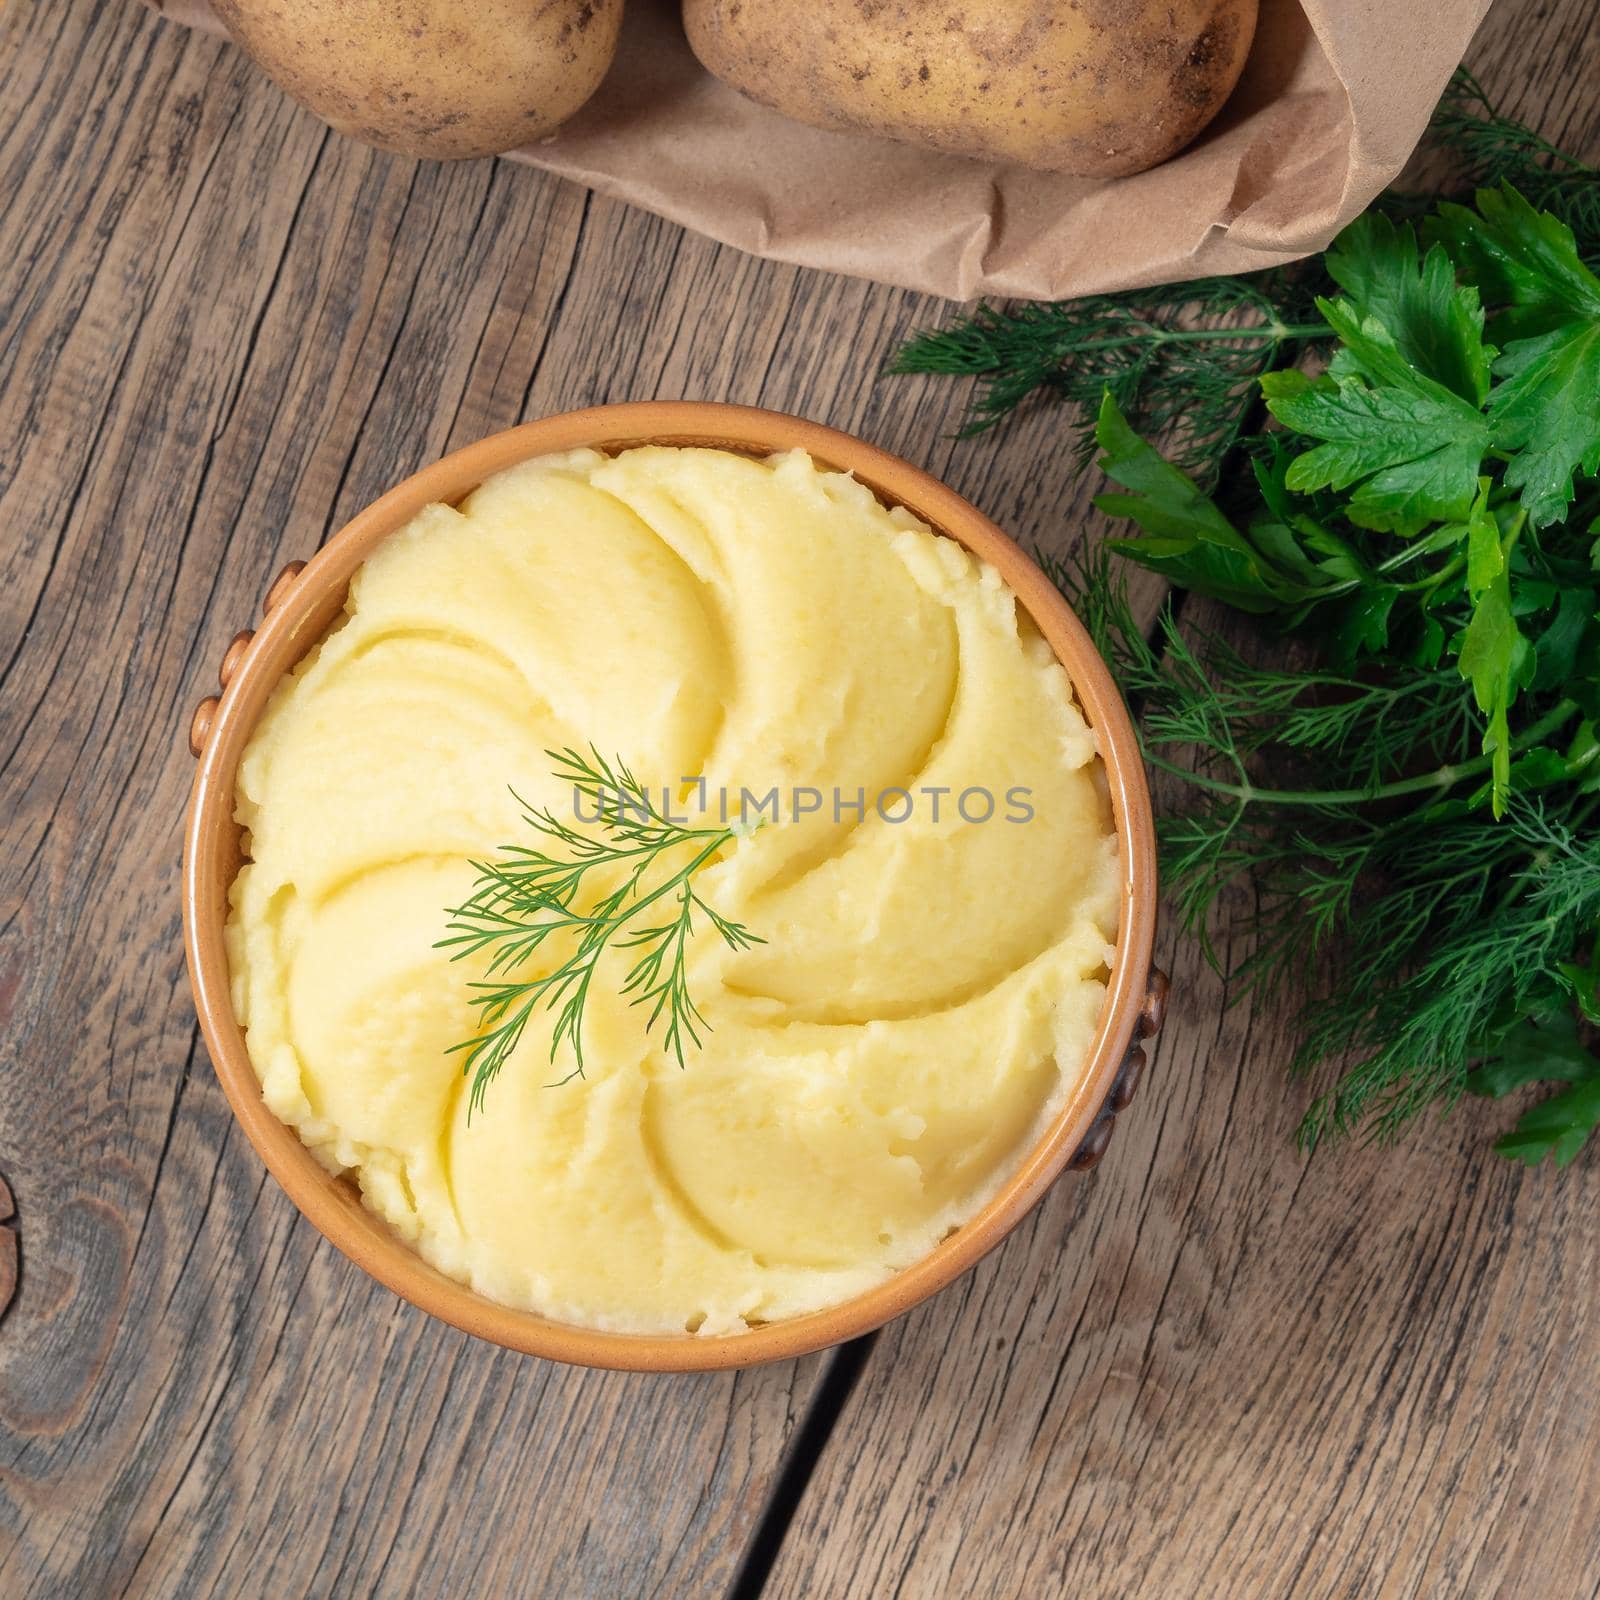 Mashed potatoes, boiled puree in a brown bowl on dark wooden rustic background, top view